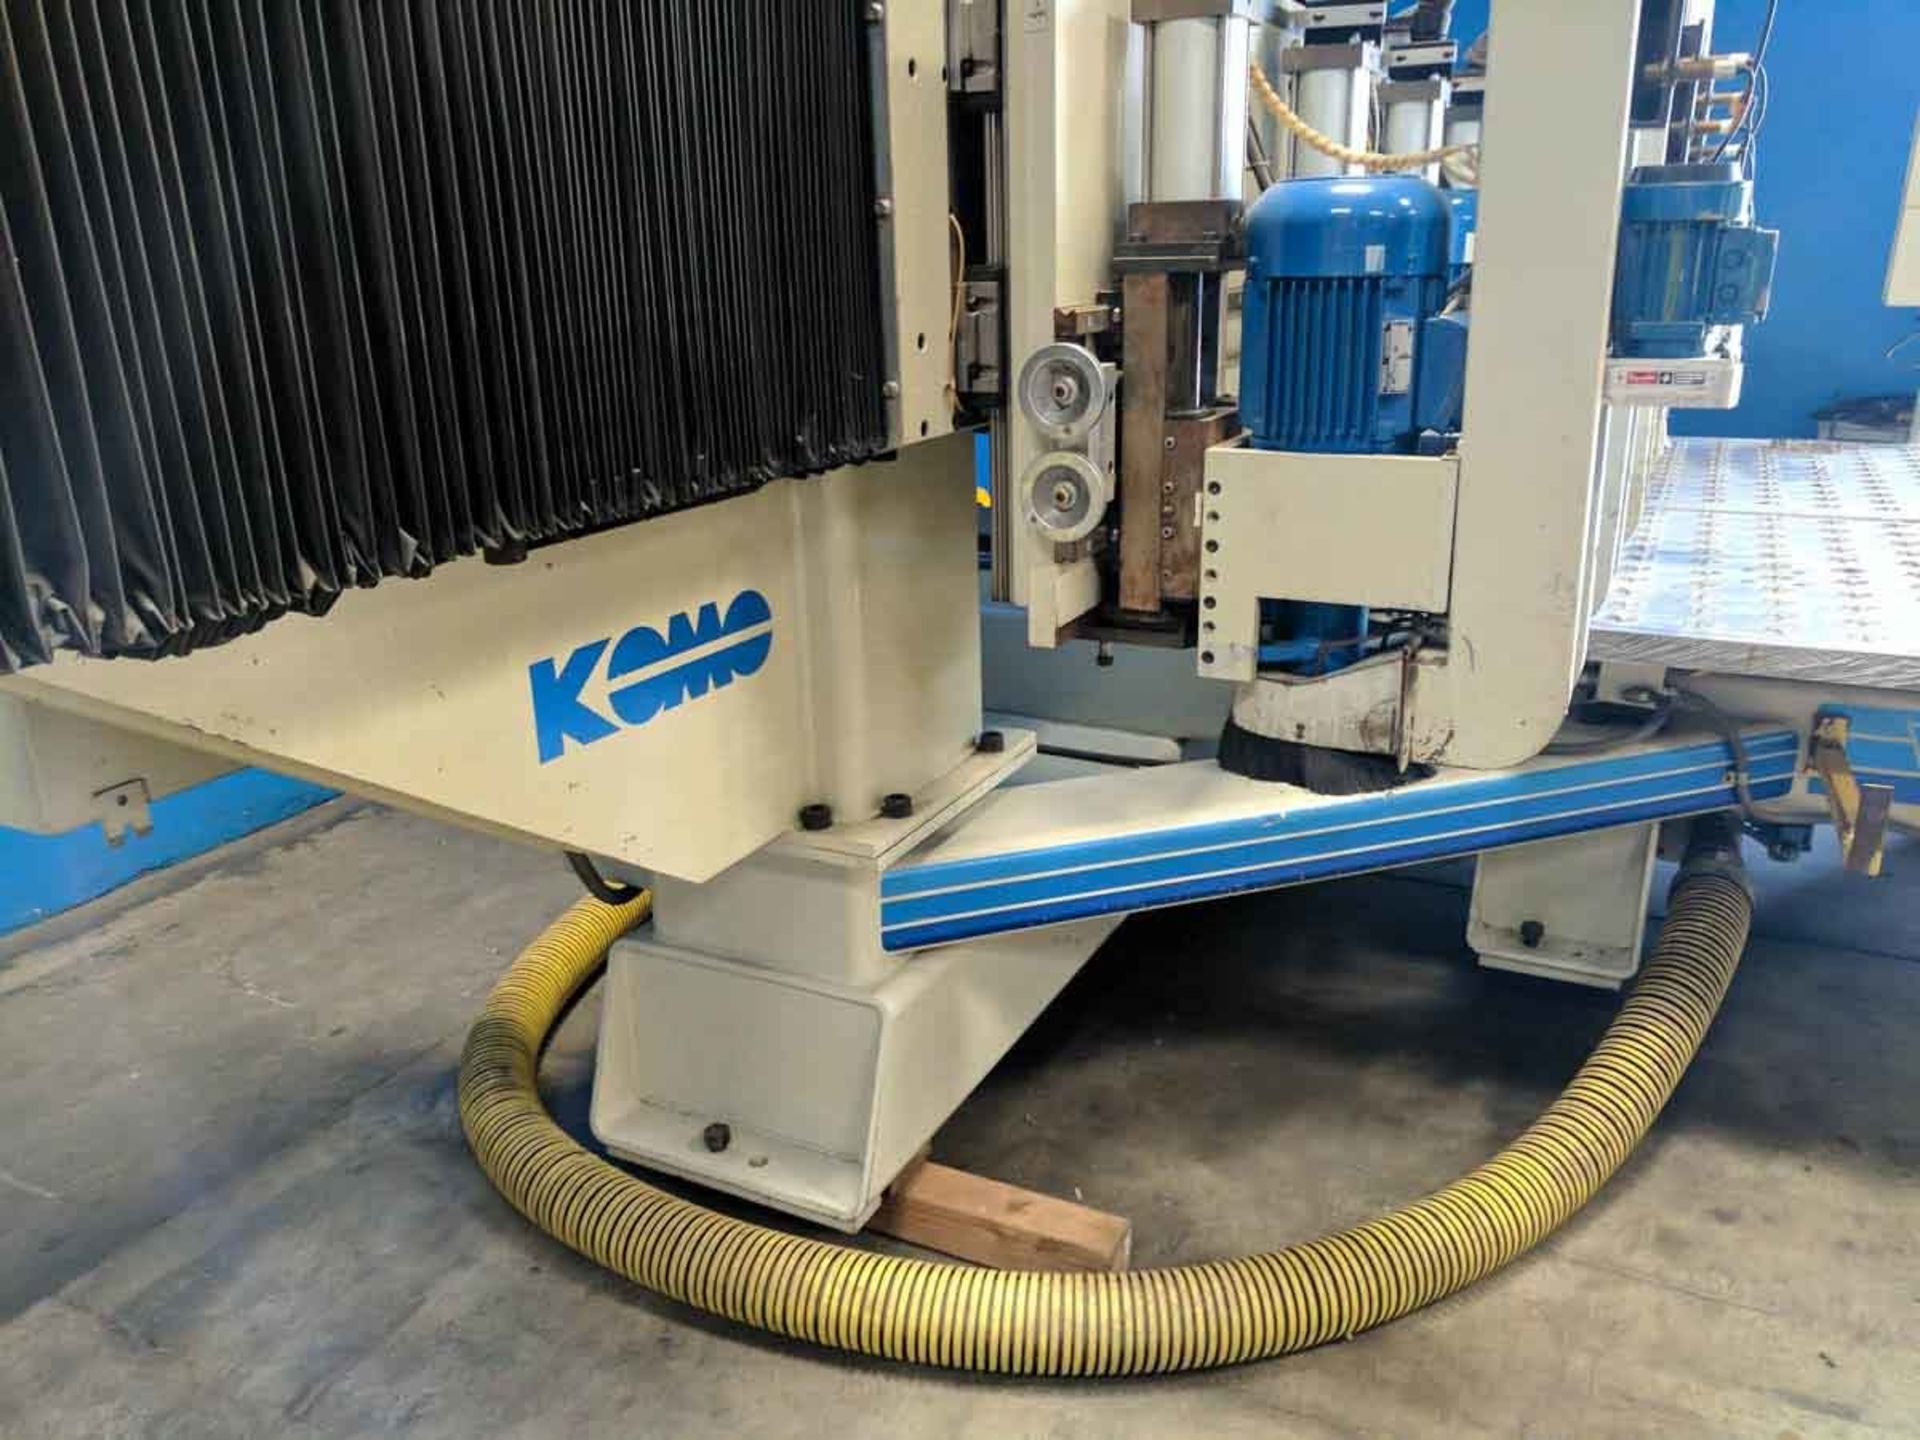 Komo VR805Q Fanuc CNC Metal Router 3 Axis 4 Spindle 96" x 60" Sheet Size - Located In: Huntington - Image 13 of 24